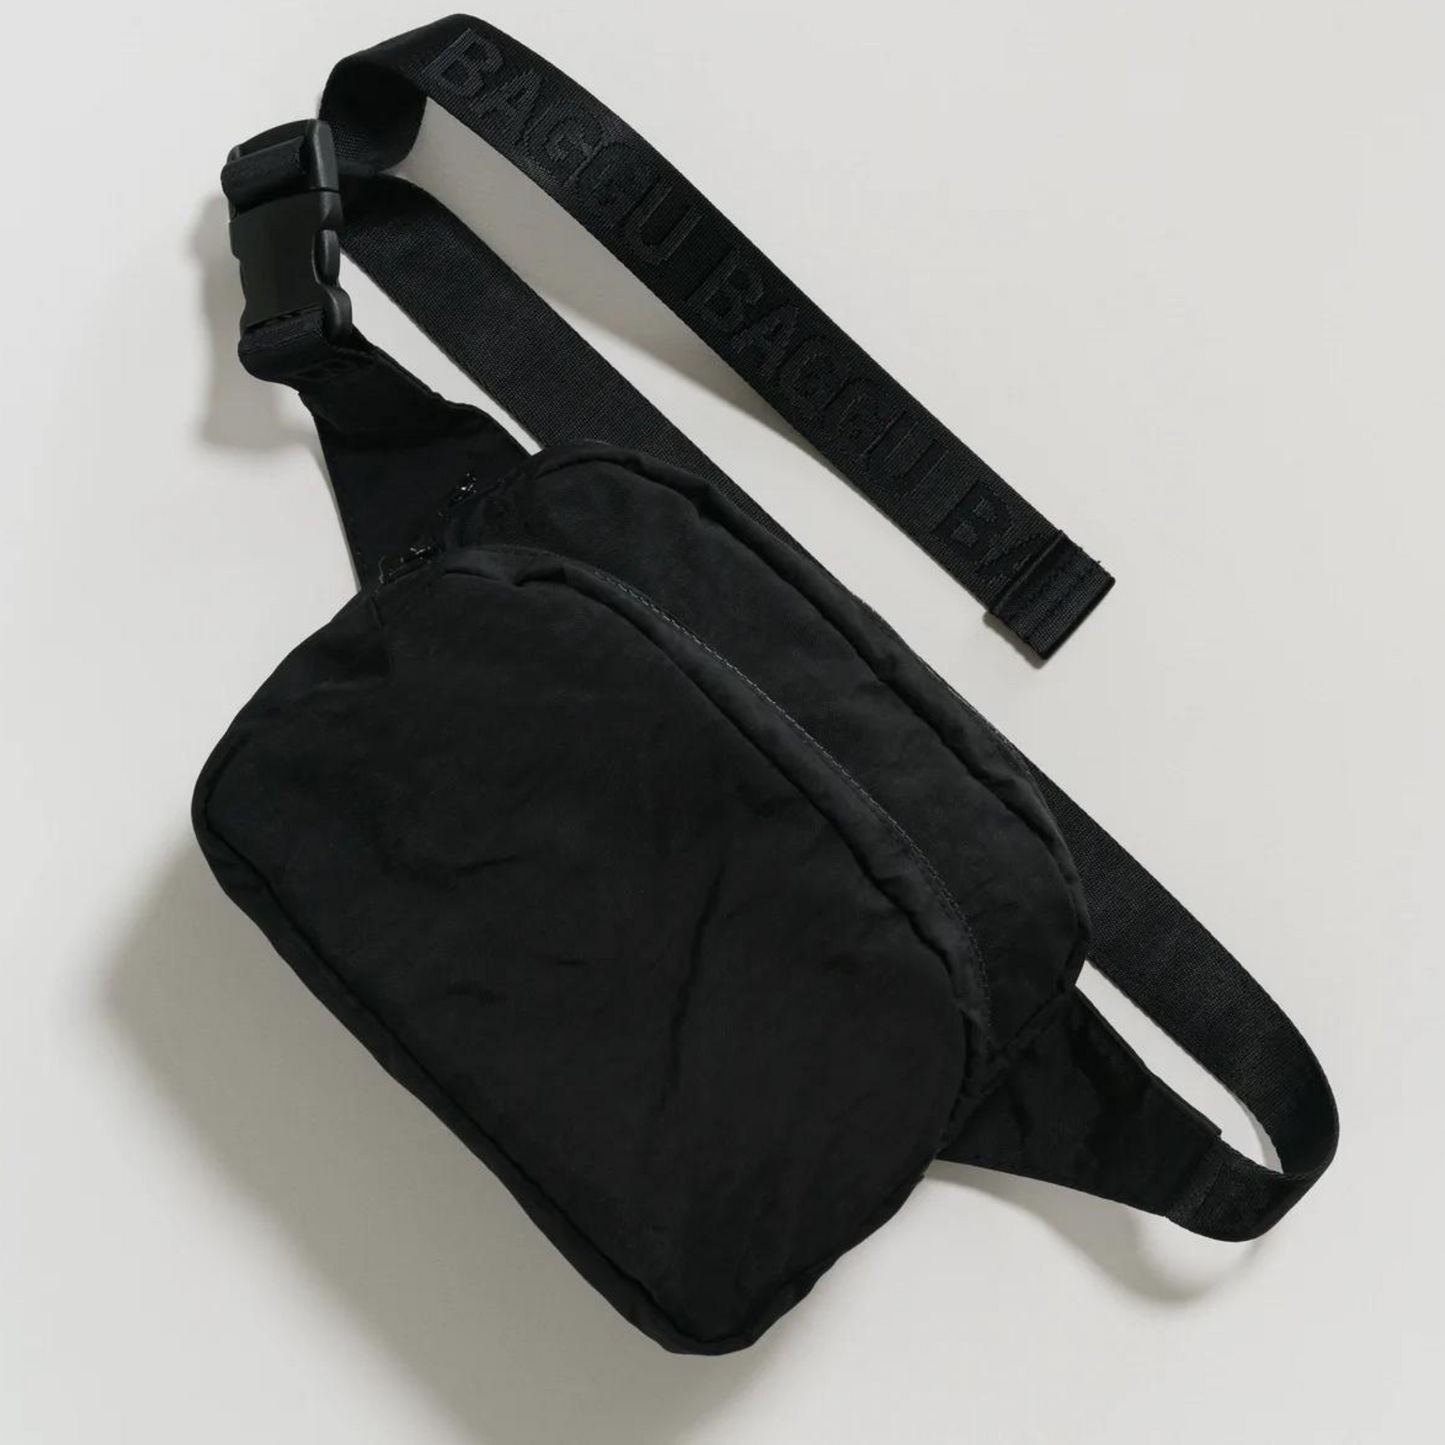 black fanny pack with two black zippers and a thick black strap and buckle